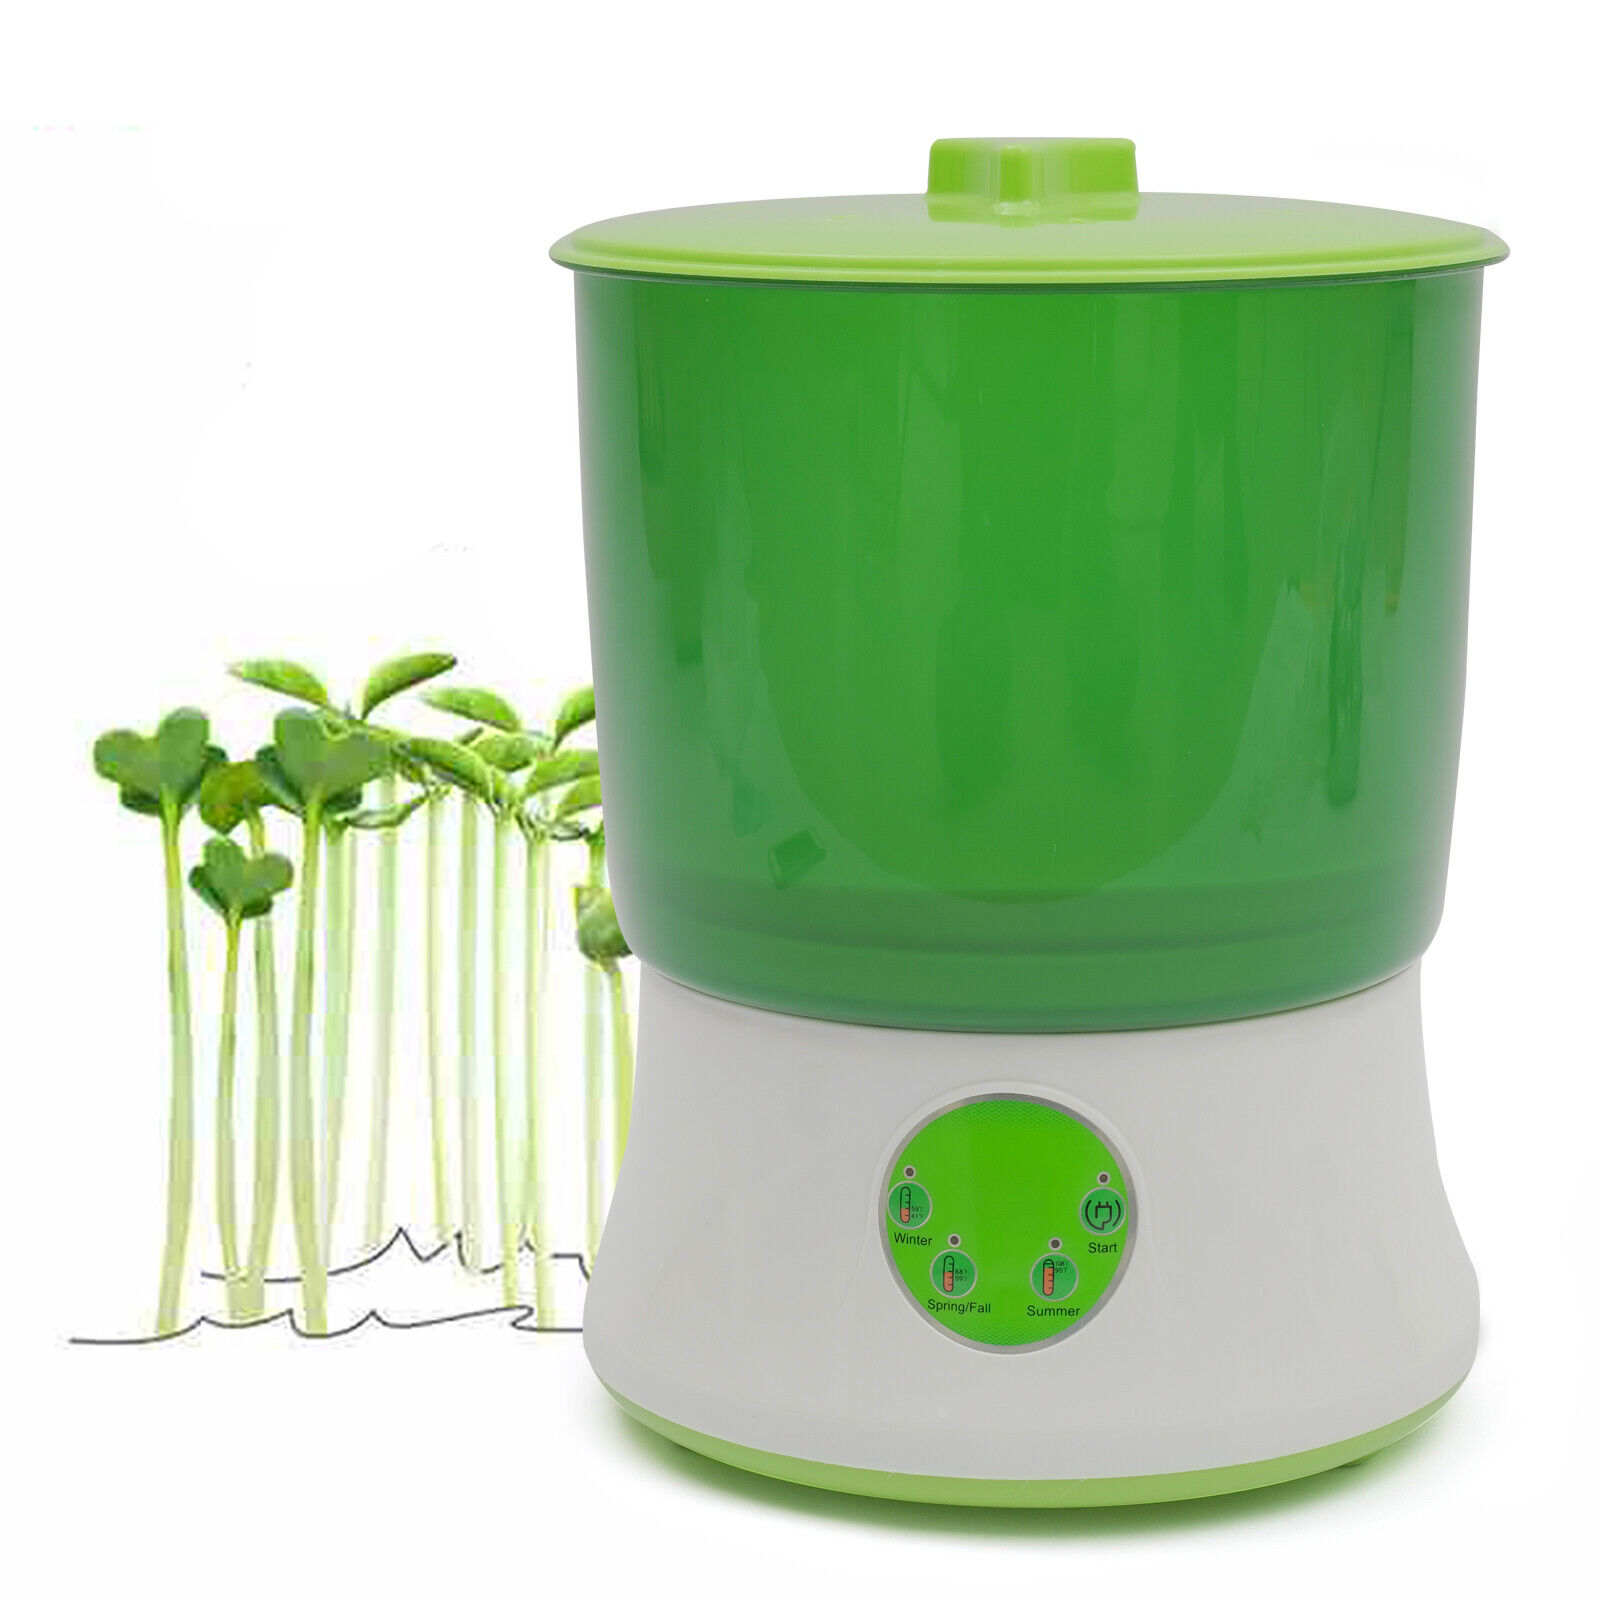 Intelligent Bean Sprouts Machine Automatic Seed Sprout Maker 110V Easy Operate